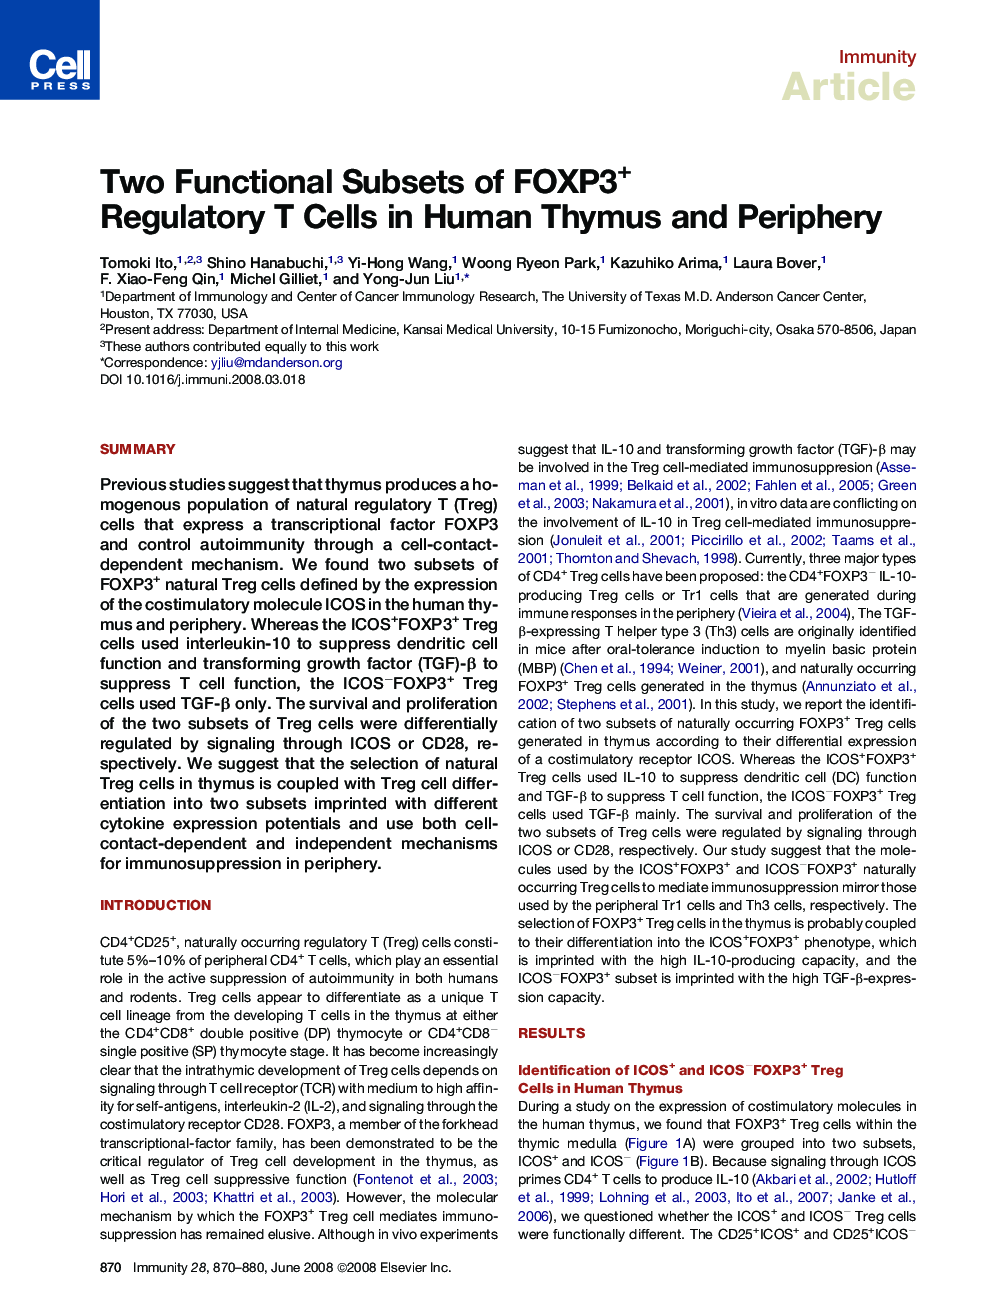 Two Functional Subsets of FOXP3+ Regulatory T Cells in Human Thymus and Periphery